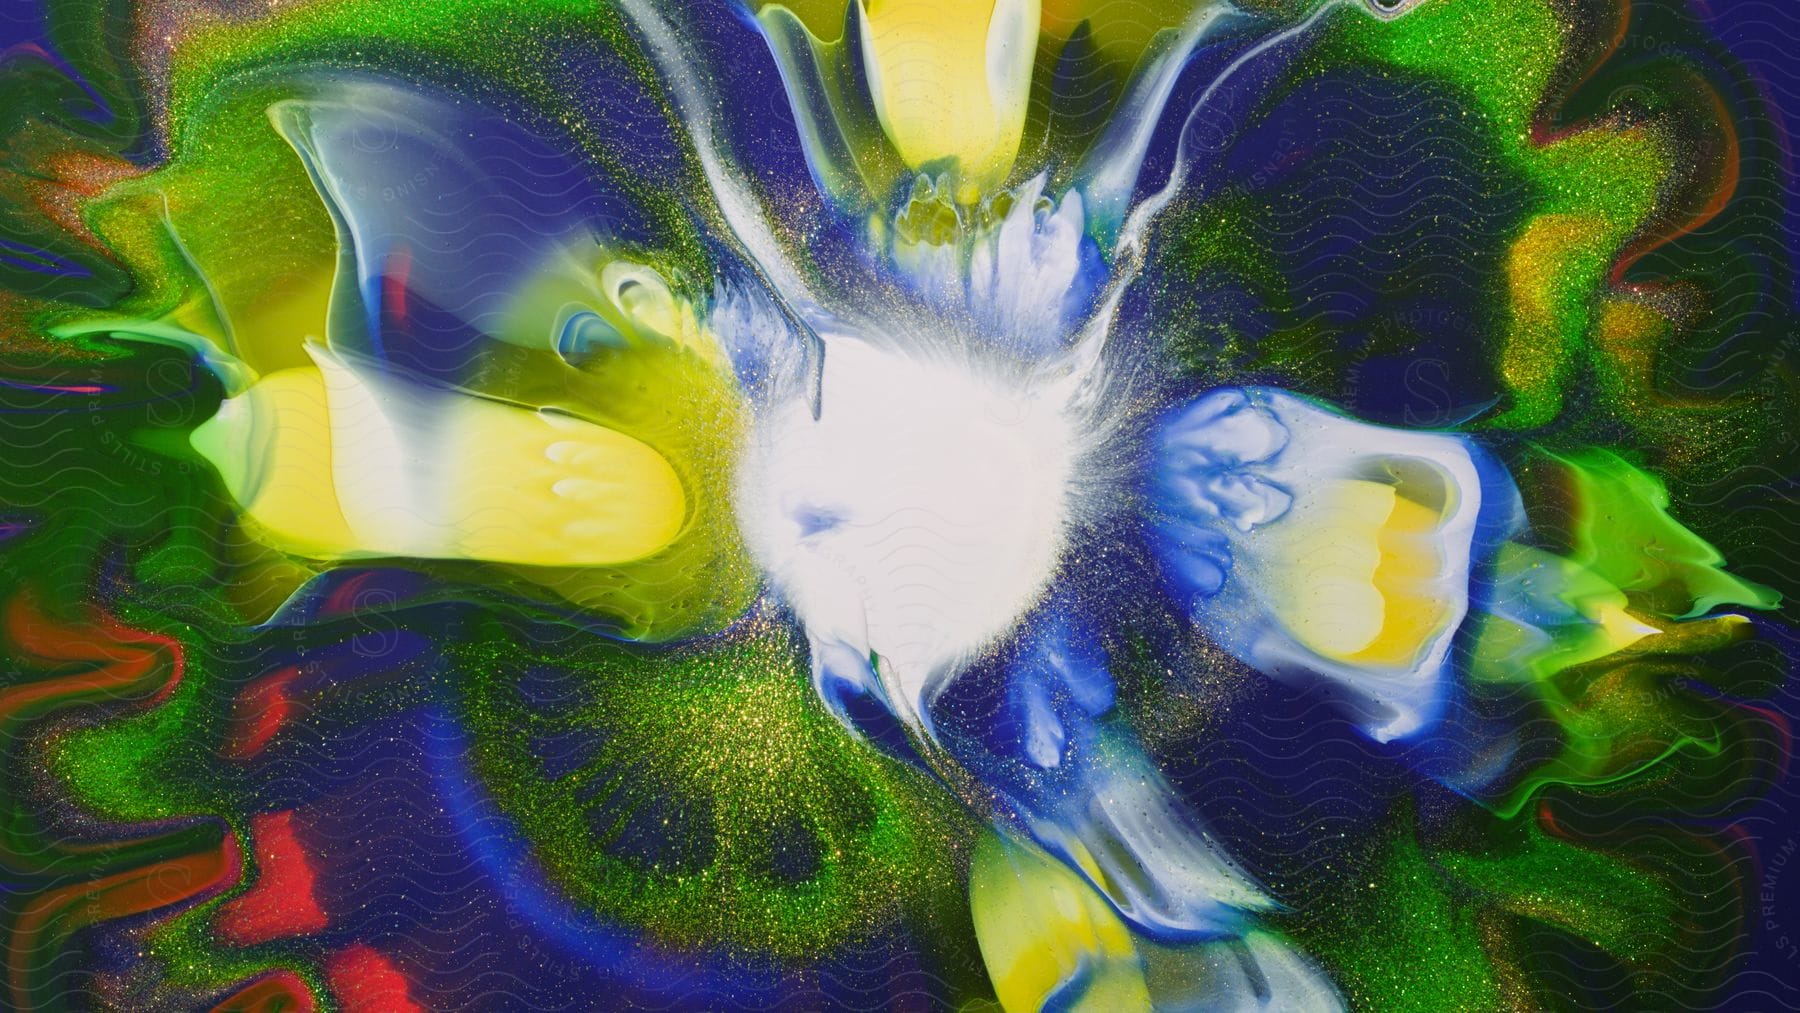 Colorful abstract photo with fluidlike patterns in green blue white and yellow